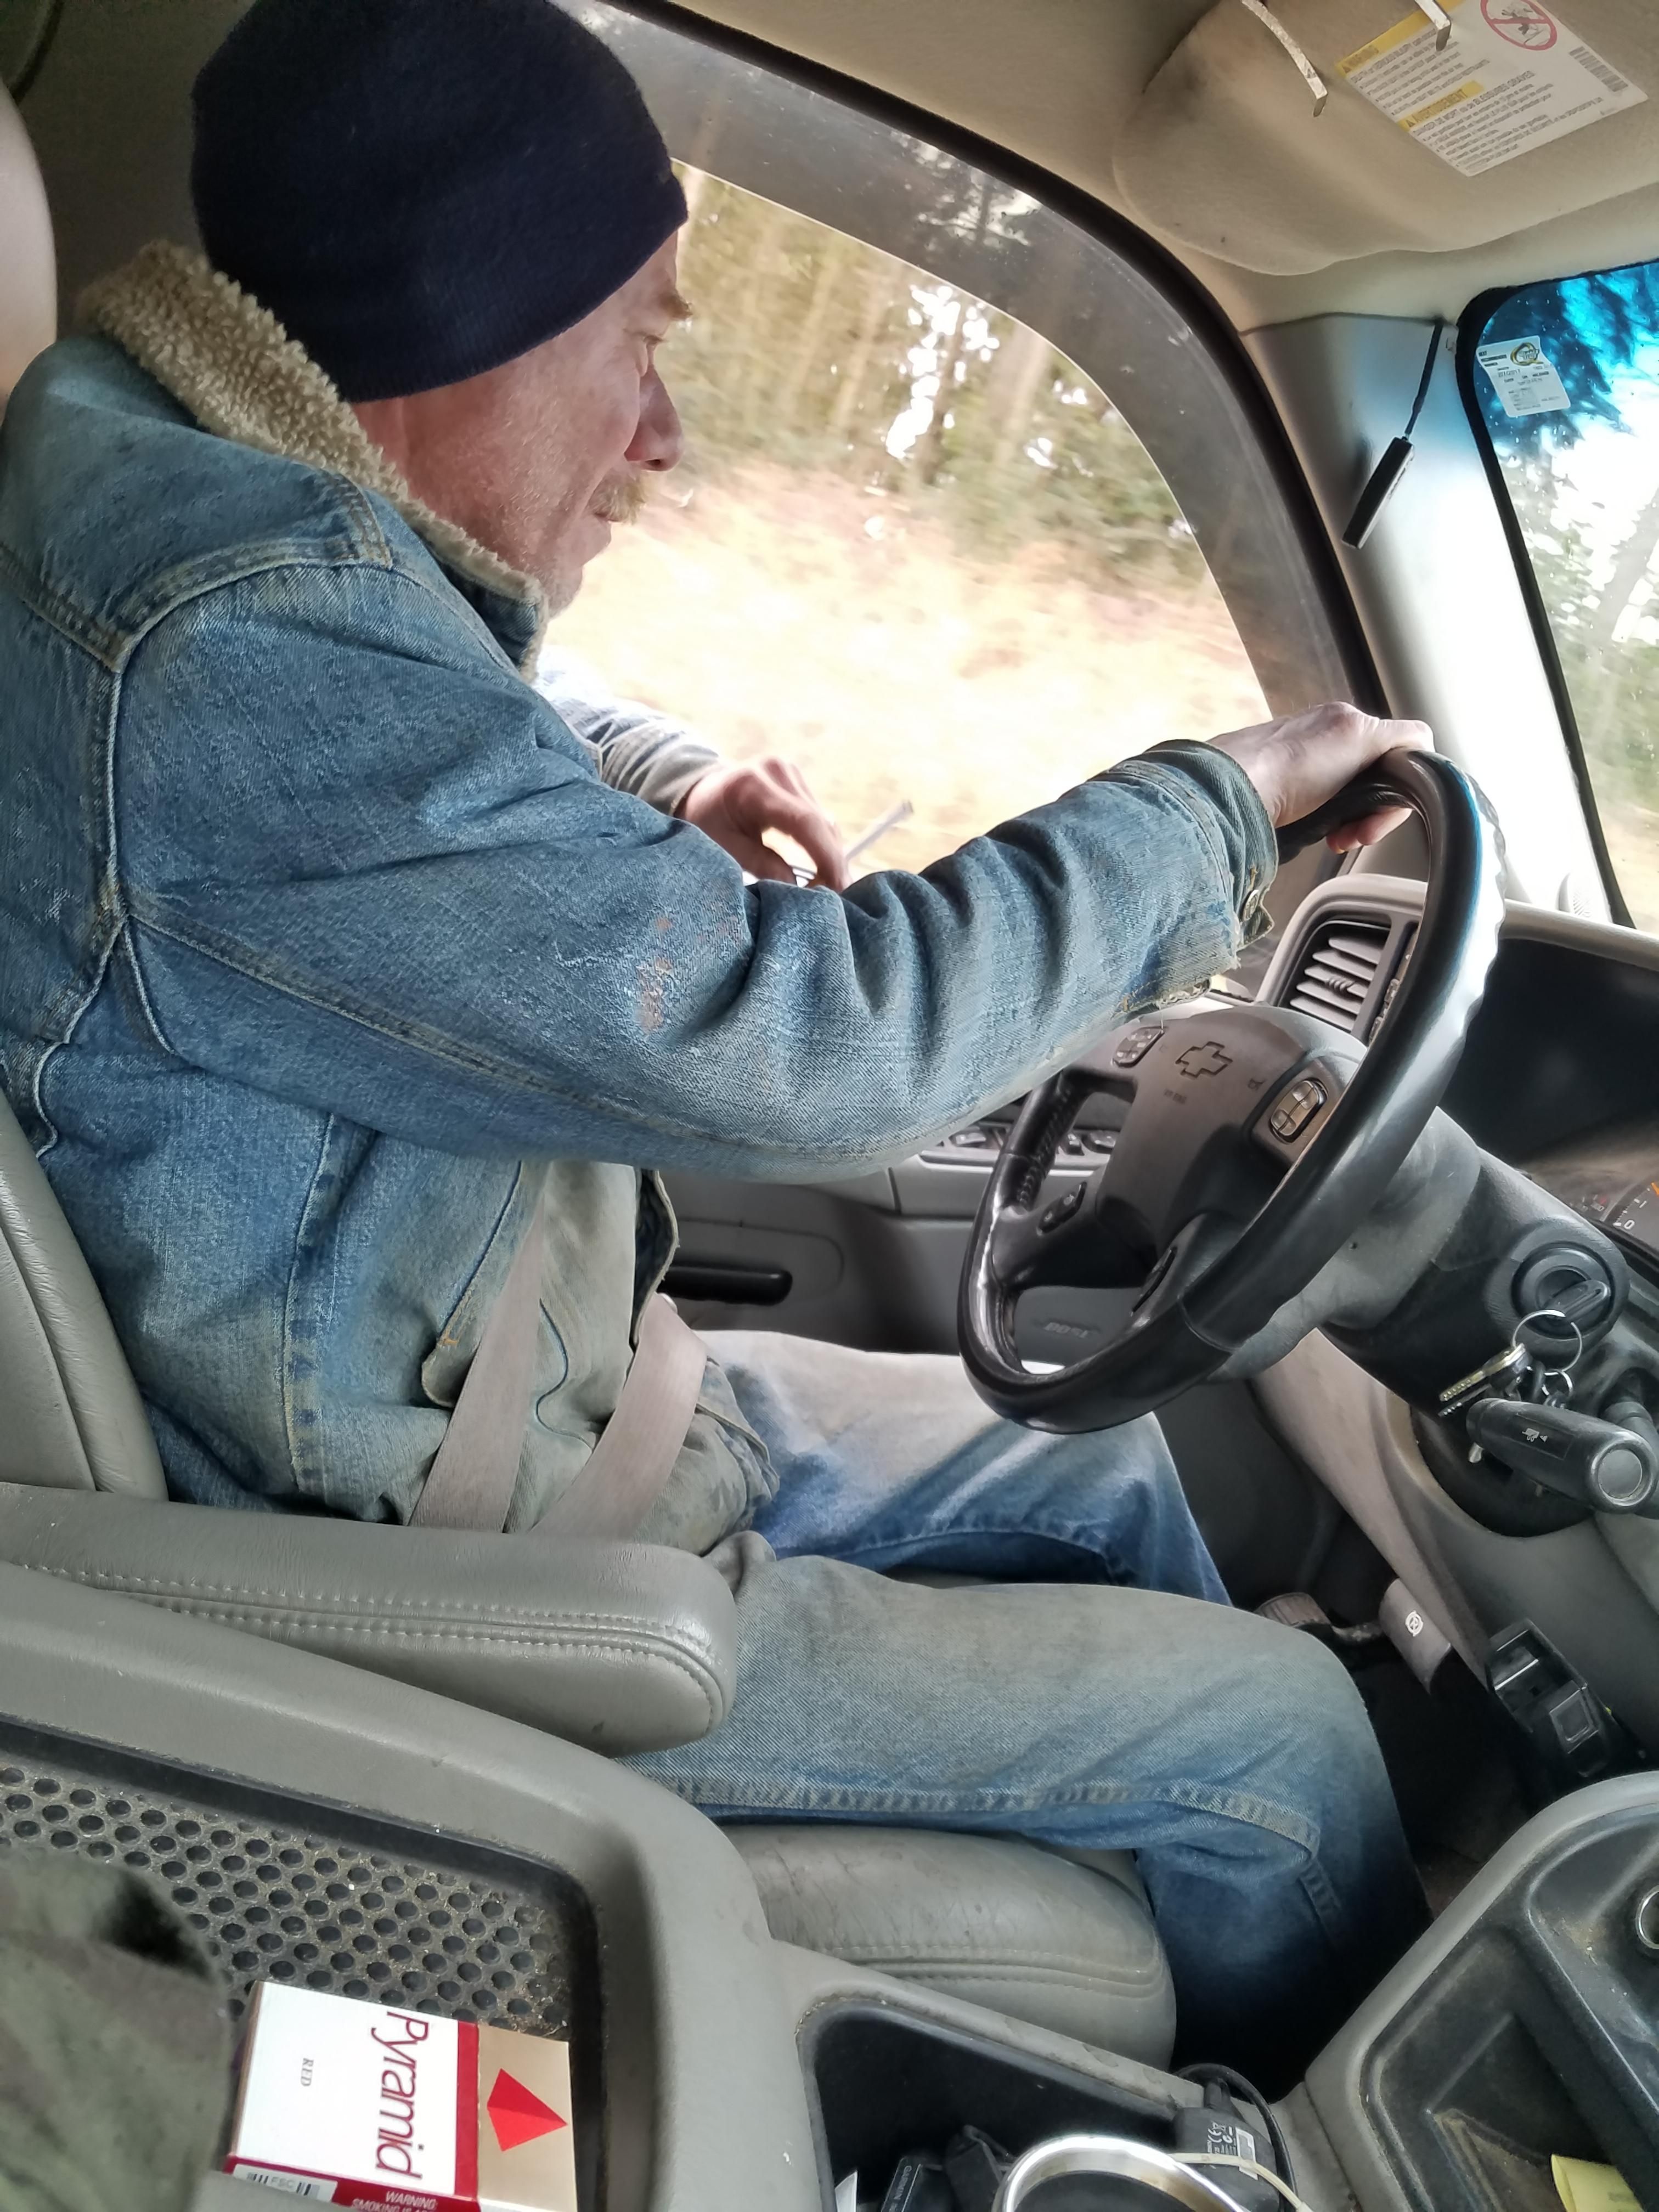 Pops picked me up so we could go on a dump run. Looked over and realized my dad is Frank Gallagher.